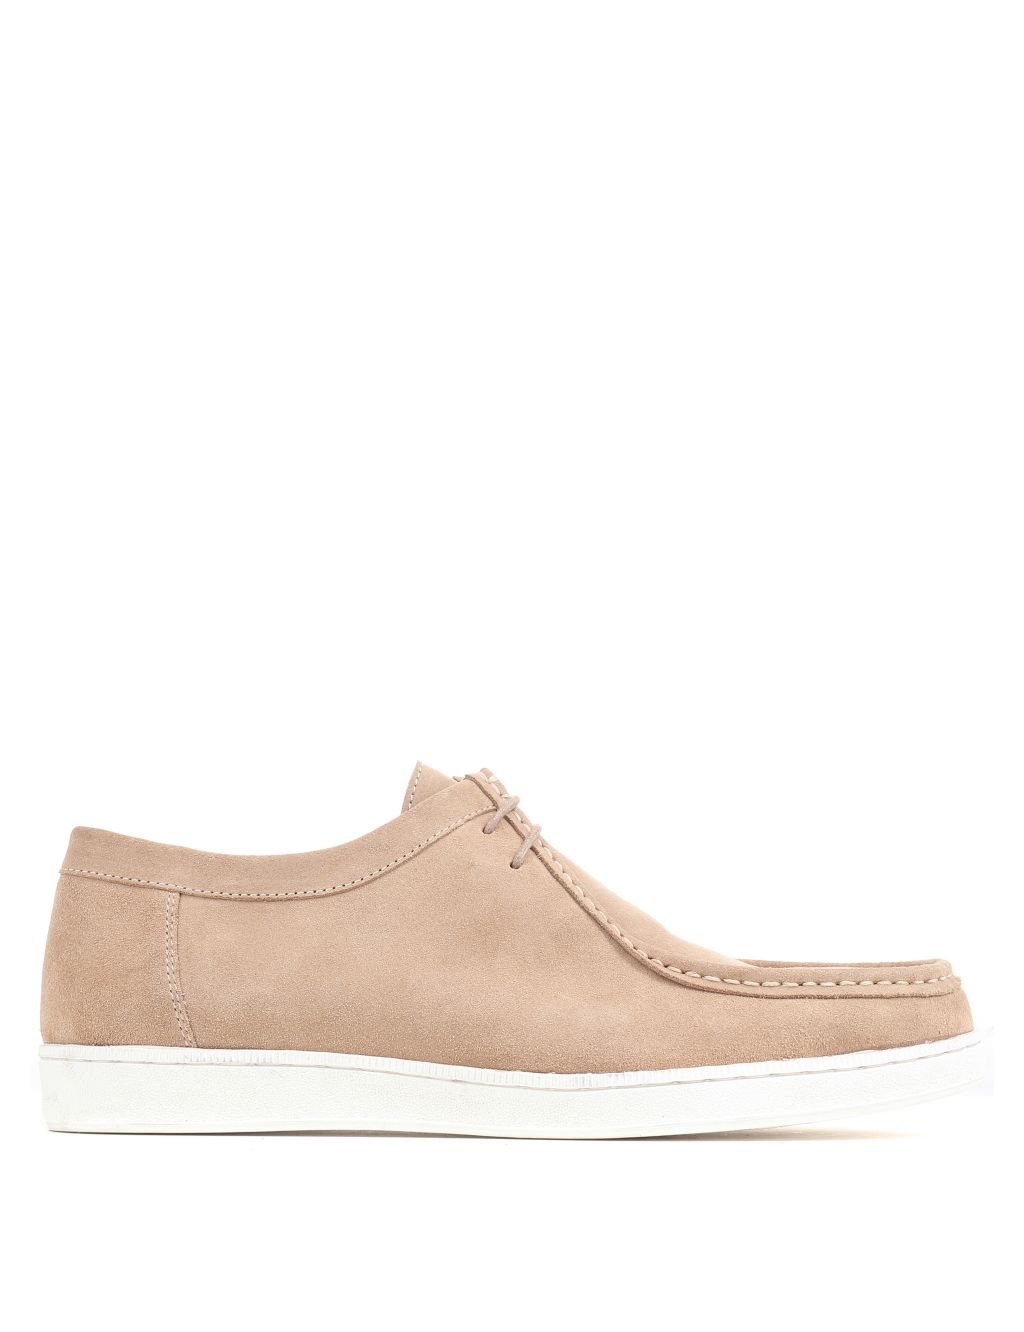 Suede Lace Up Casuals image 5